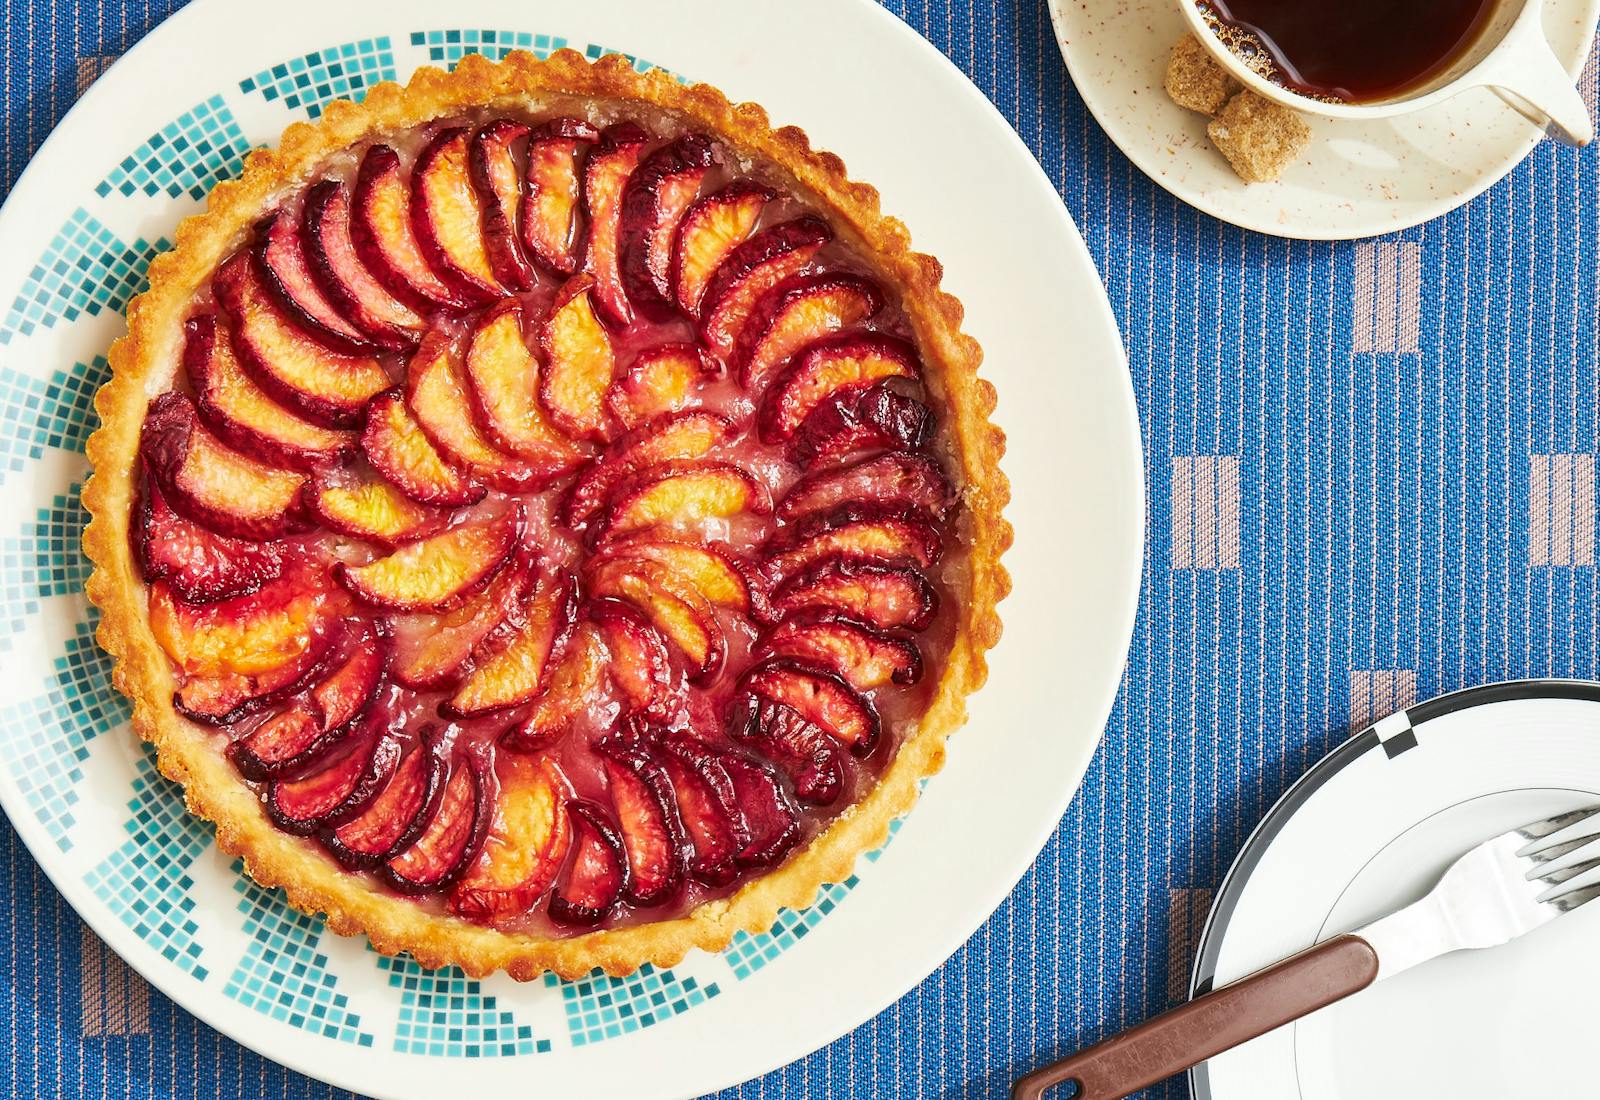 Peach tart on blue and white plate atop blue patterned tablecloth.